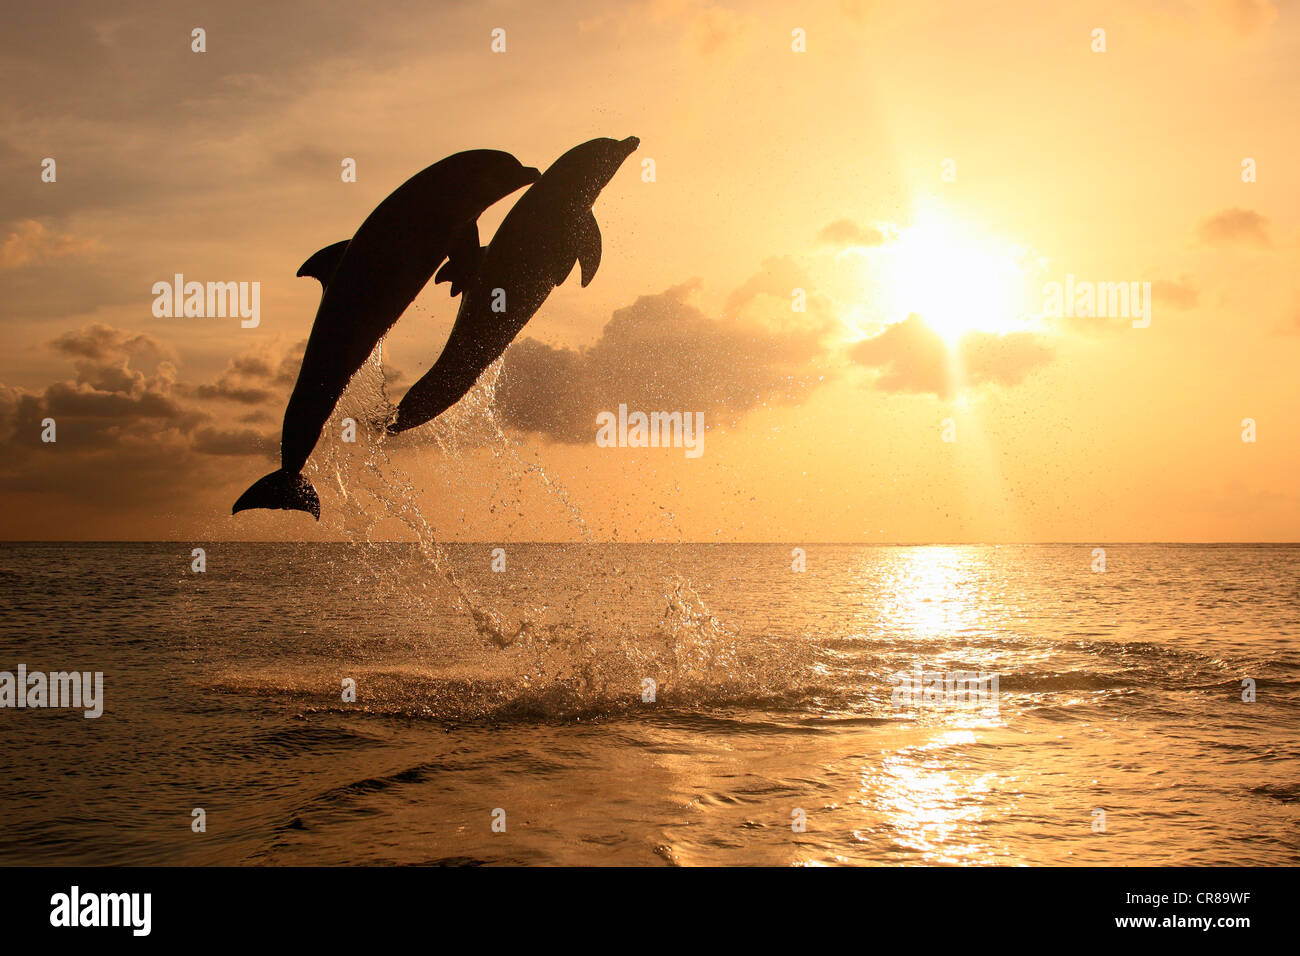 Two Bottlenose Dolphins (Tursiops truncatus), adult, jumping out of the sea, Roatan, Honduras, Caribbean, Central America Stock Photo